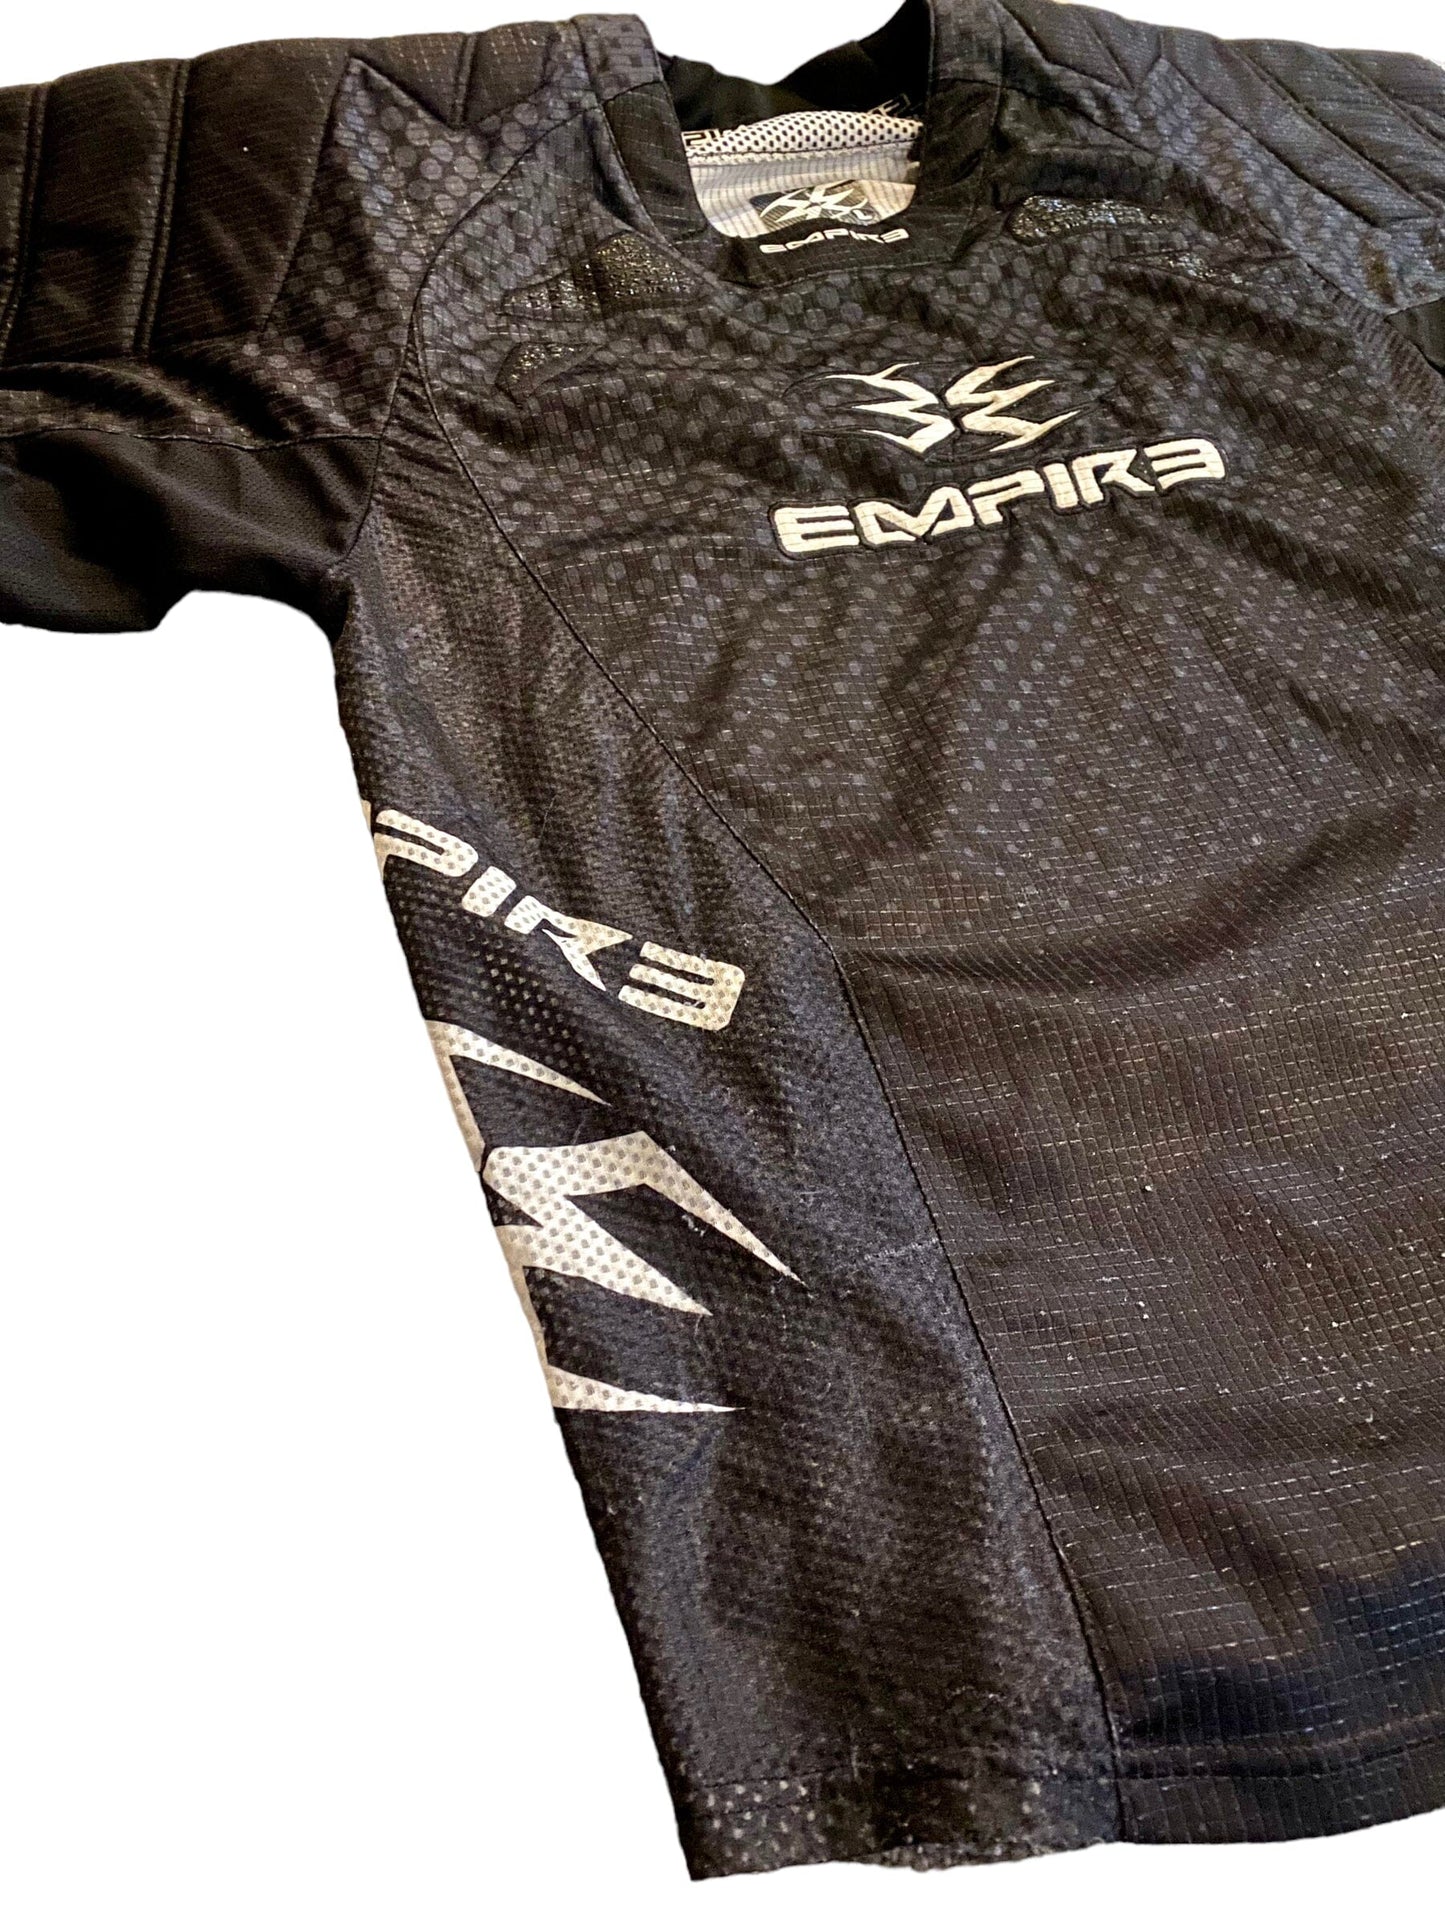 Used Empire Contact Jersey Size Large CPXBrosPaintball 